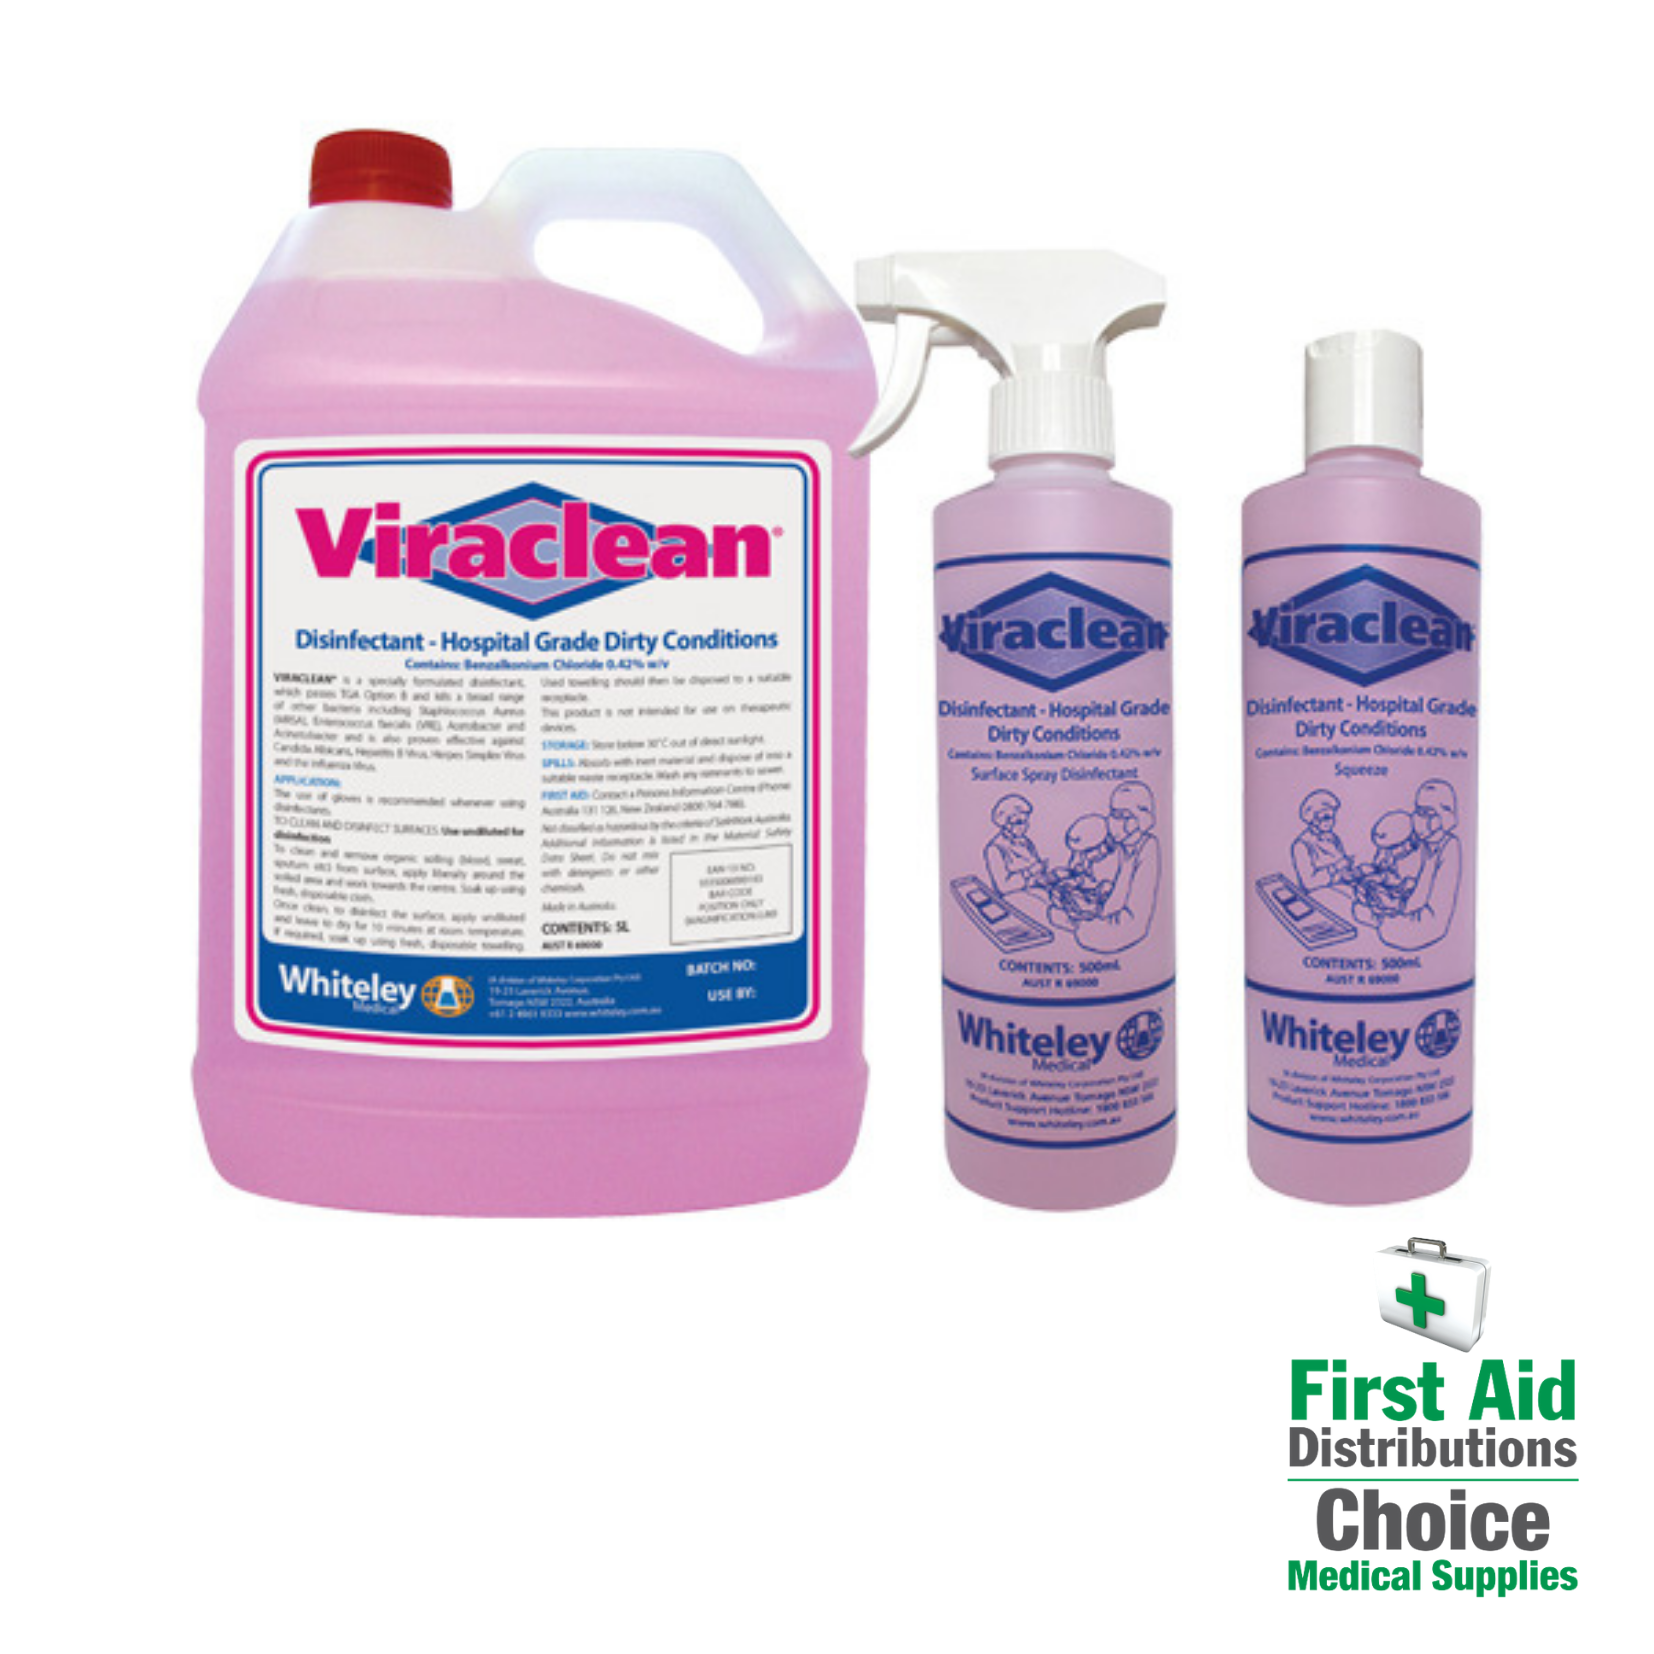 collections/Viraclean_First_Aid_Distributions_0fb470ff-4365-4ddf-b1fa-4511c2a991a8.png